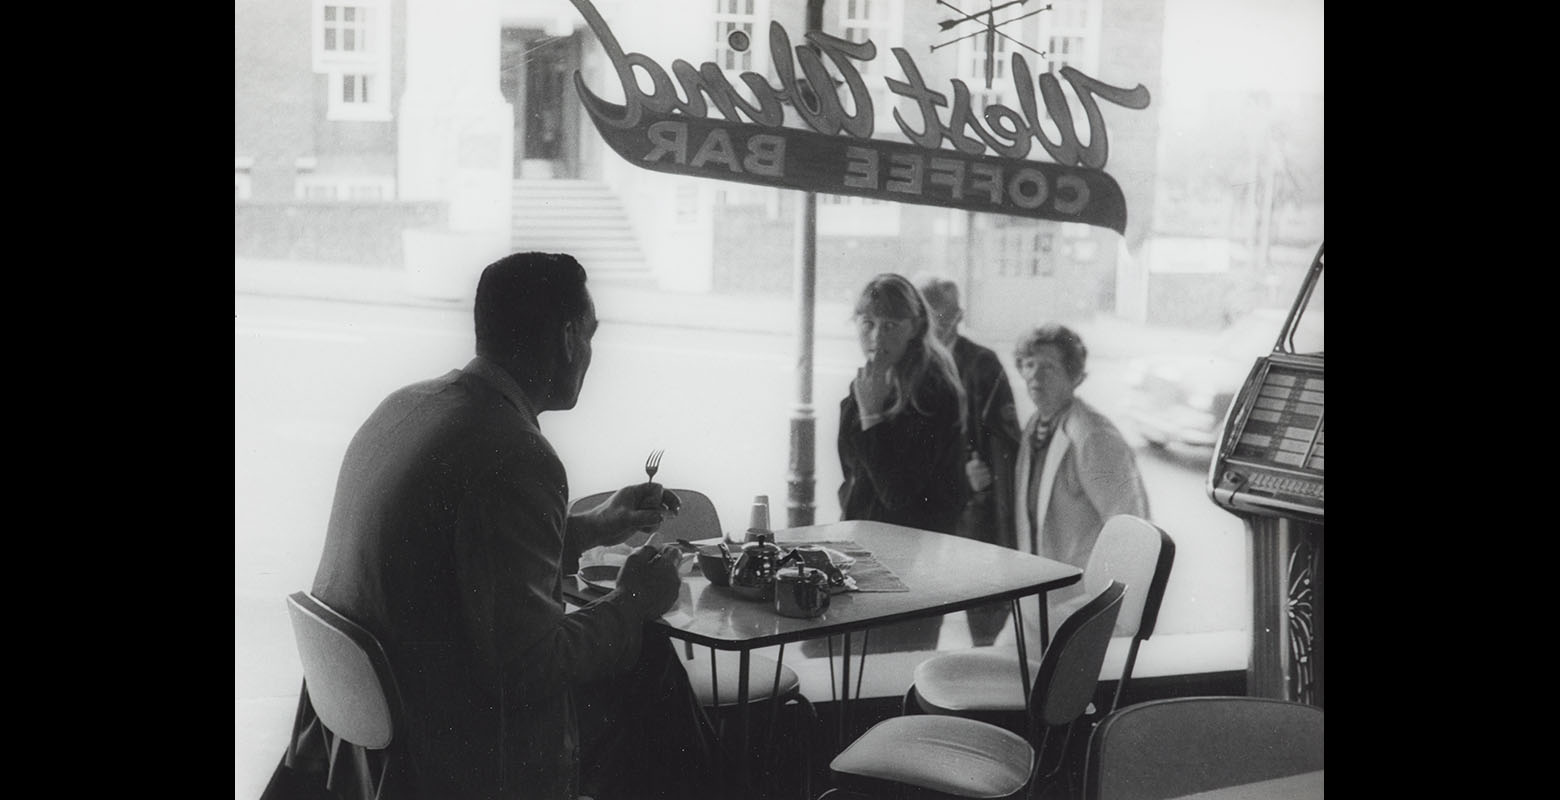 Man sits at a table alone in a cafe, looking out the window, while three people outside look in